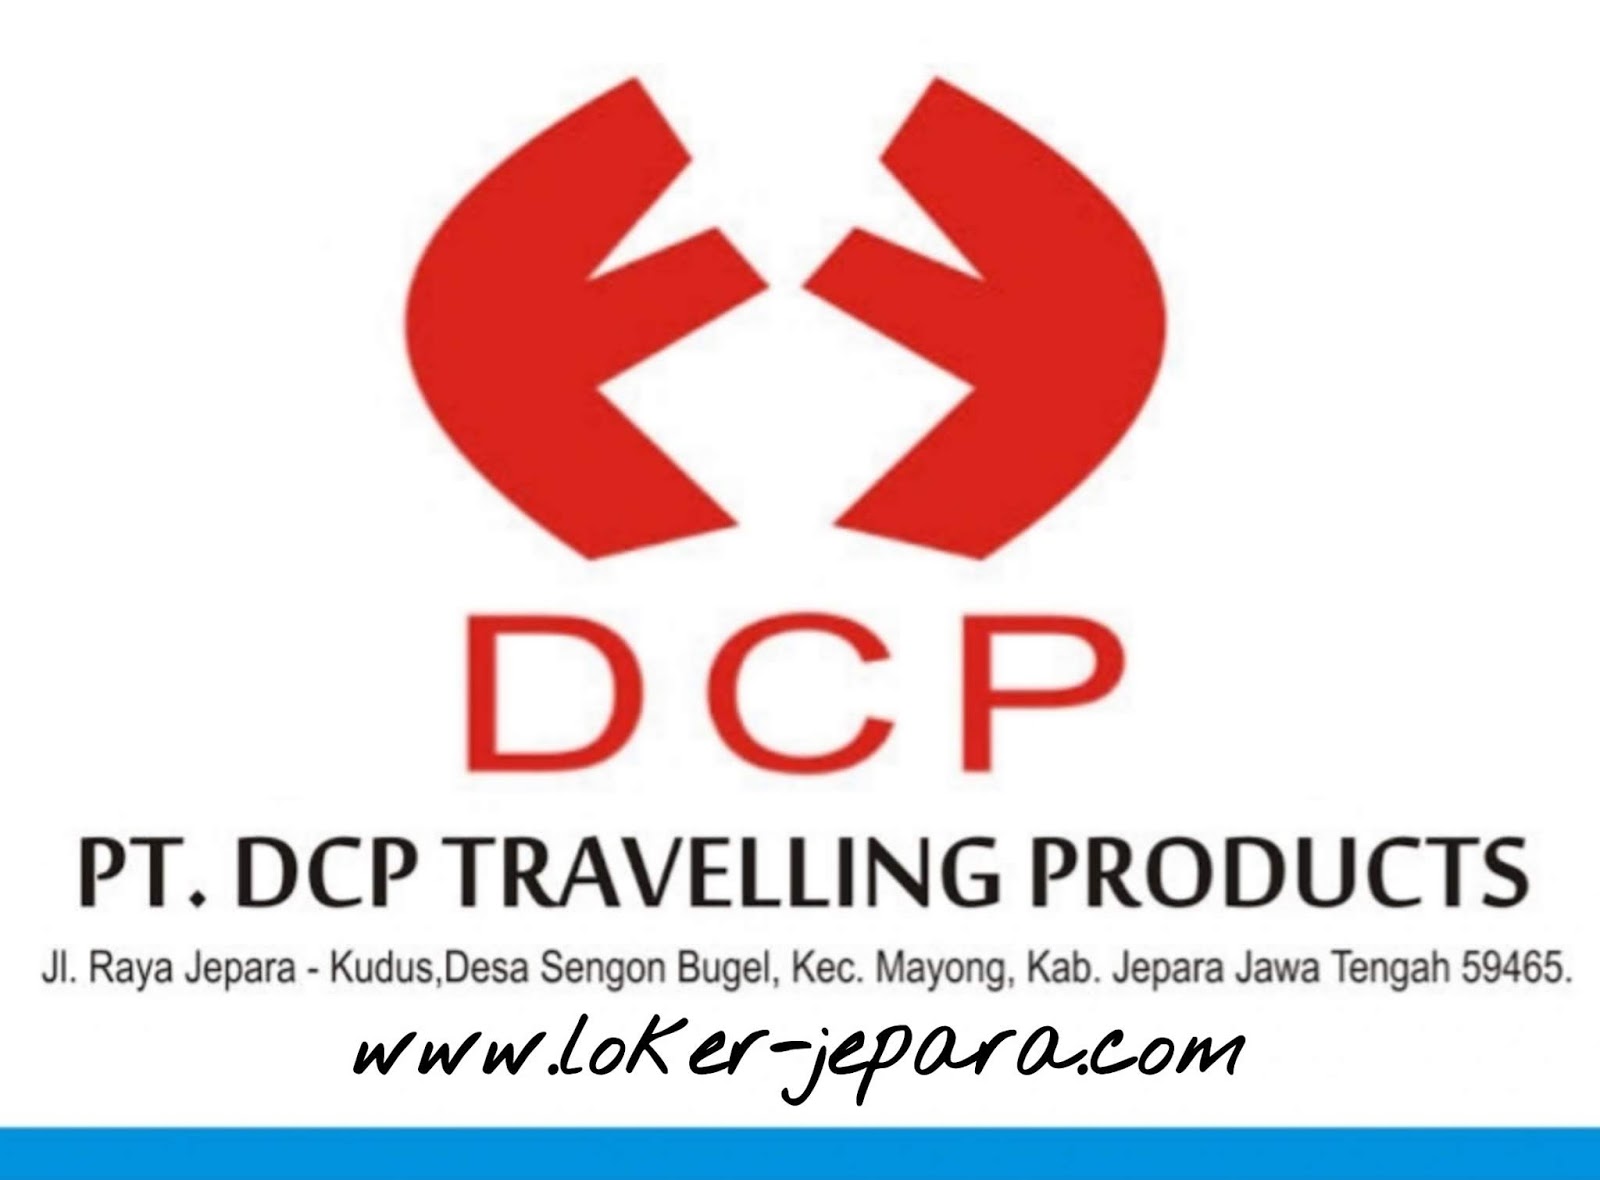 Loker Jepara Mei 2020 PT. DCP Travelling Products